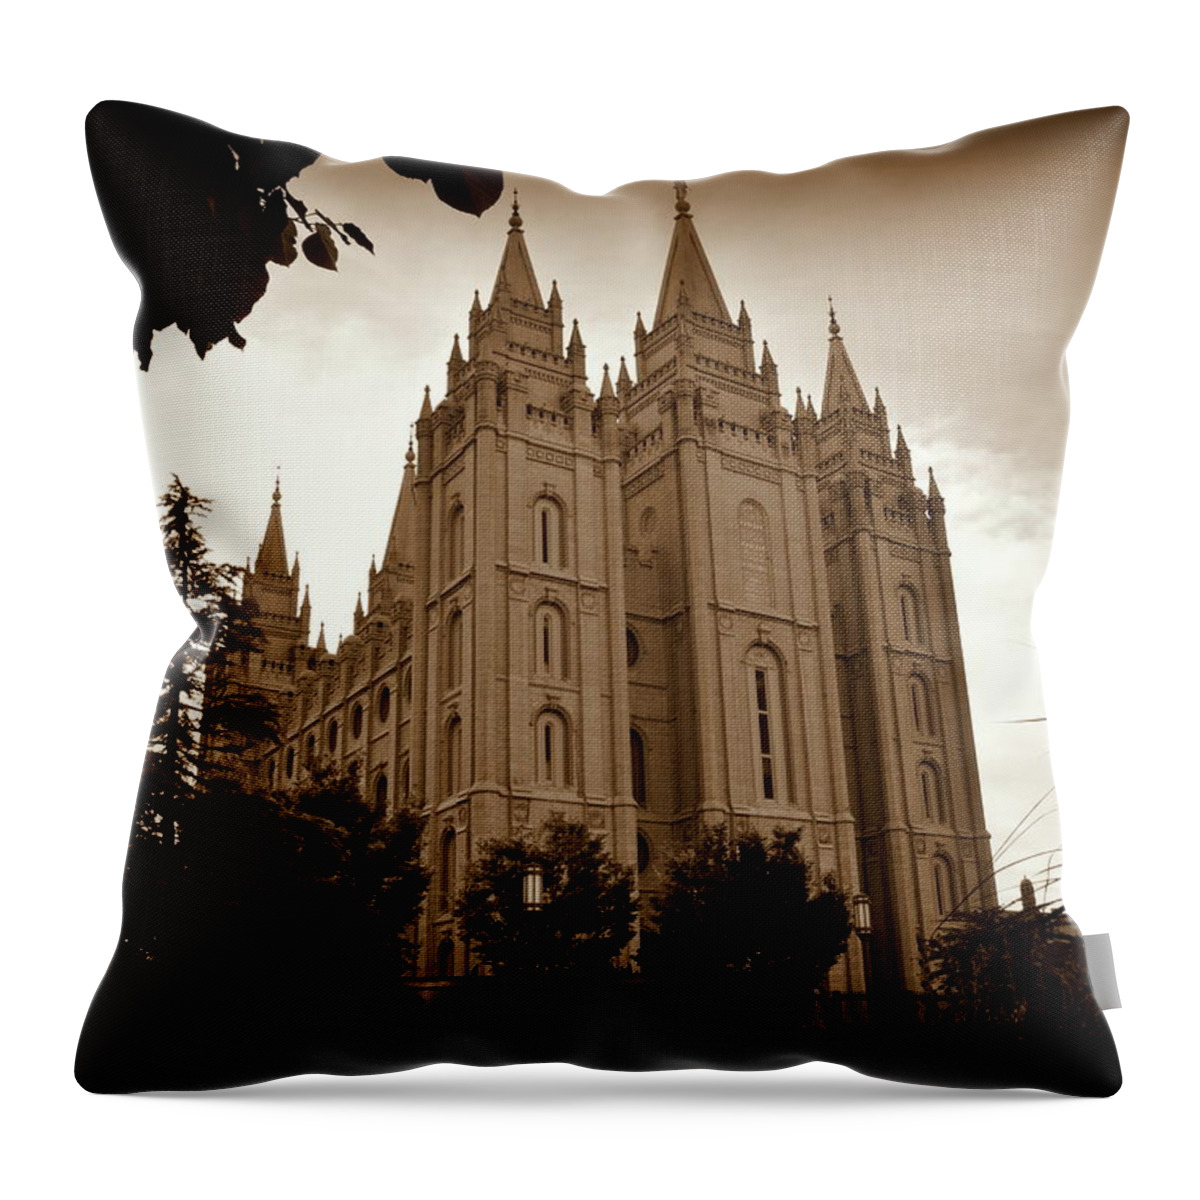 Salt Lake City Throw Pillow featuring the photograph Salt Lake City LDS Temple Sepia by Nathan Abbott